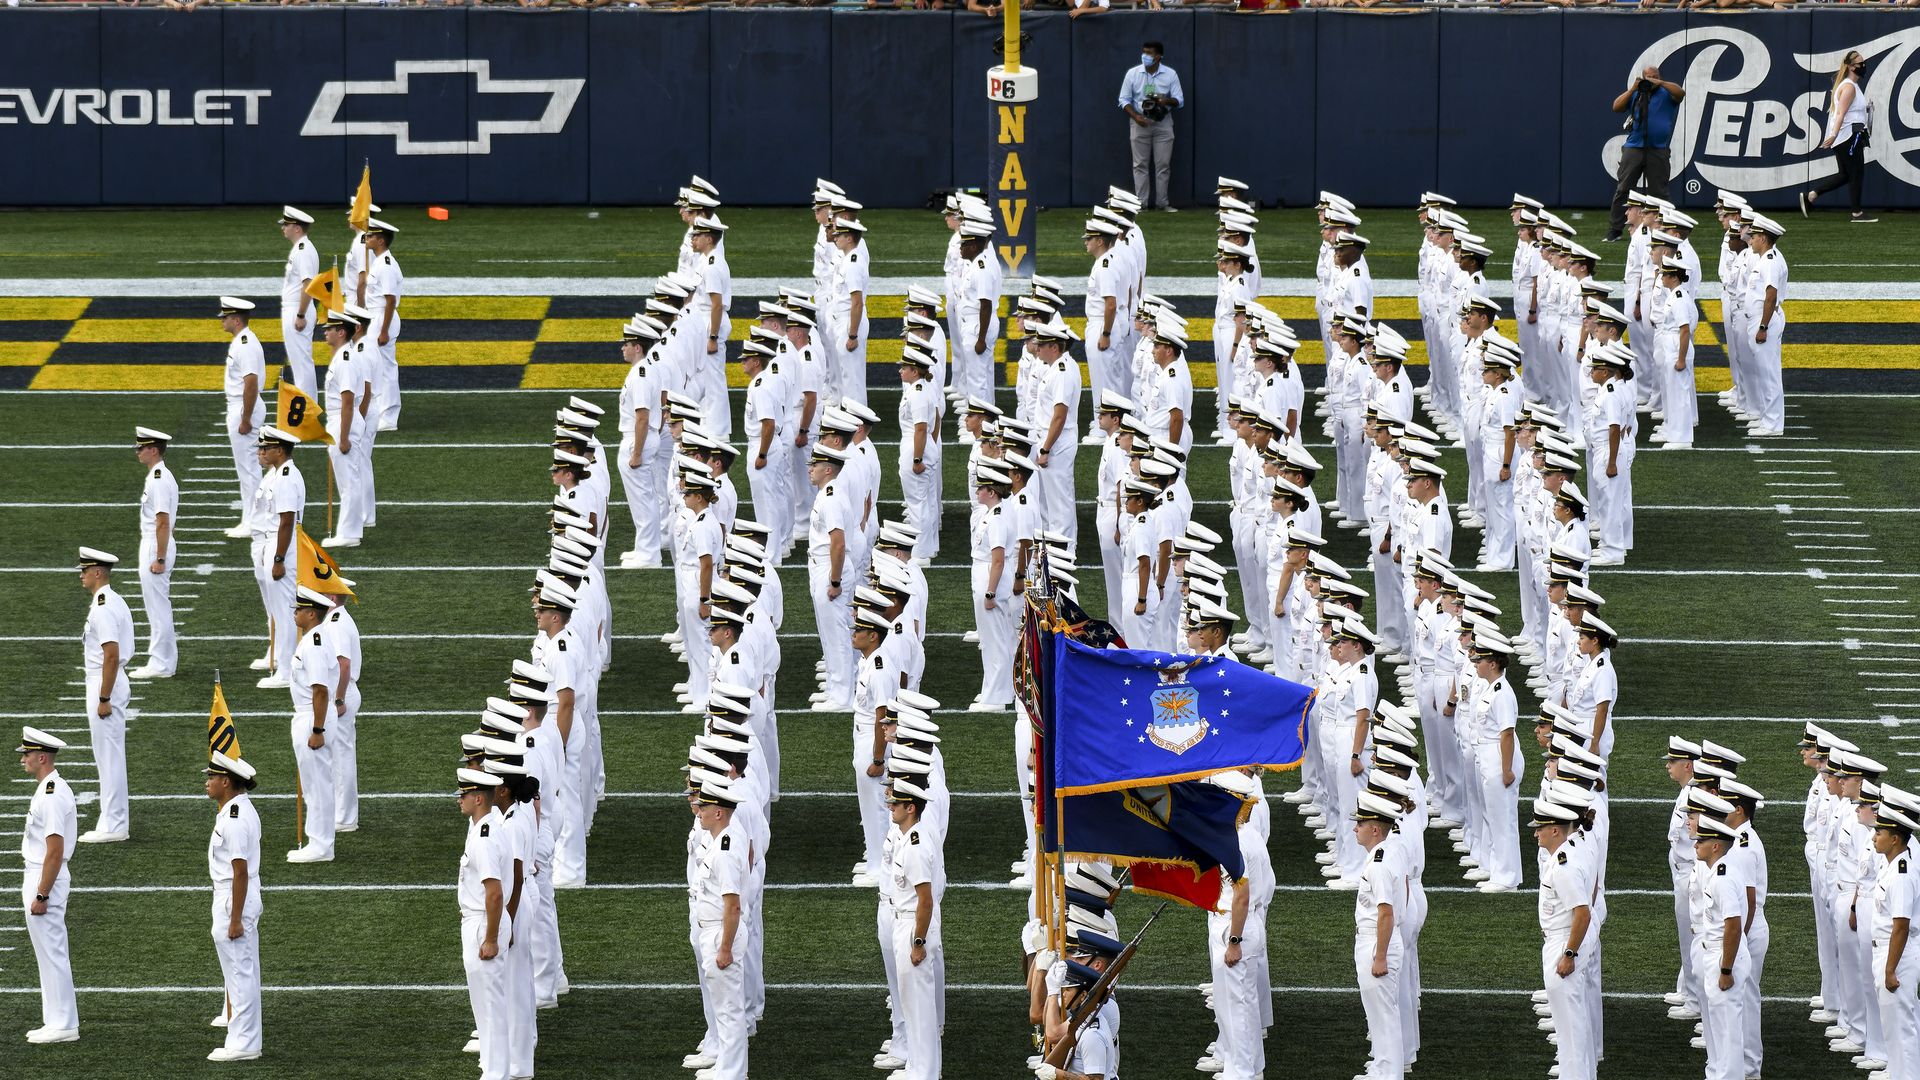 The Navy Color Guard presents the flags as the Corps of the Cadets takes the field prior to the Air Force game versus the Navy on September 11, 2021 at Navy